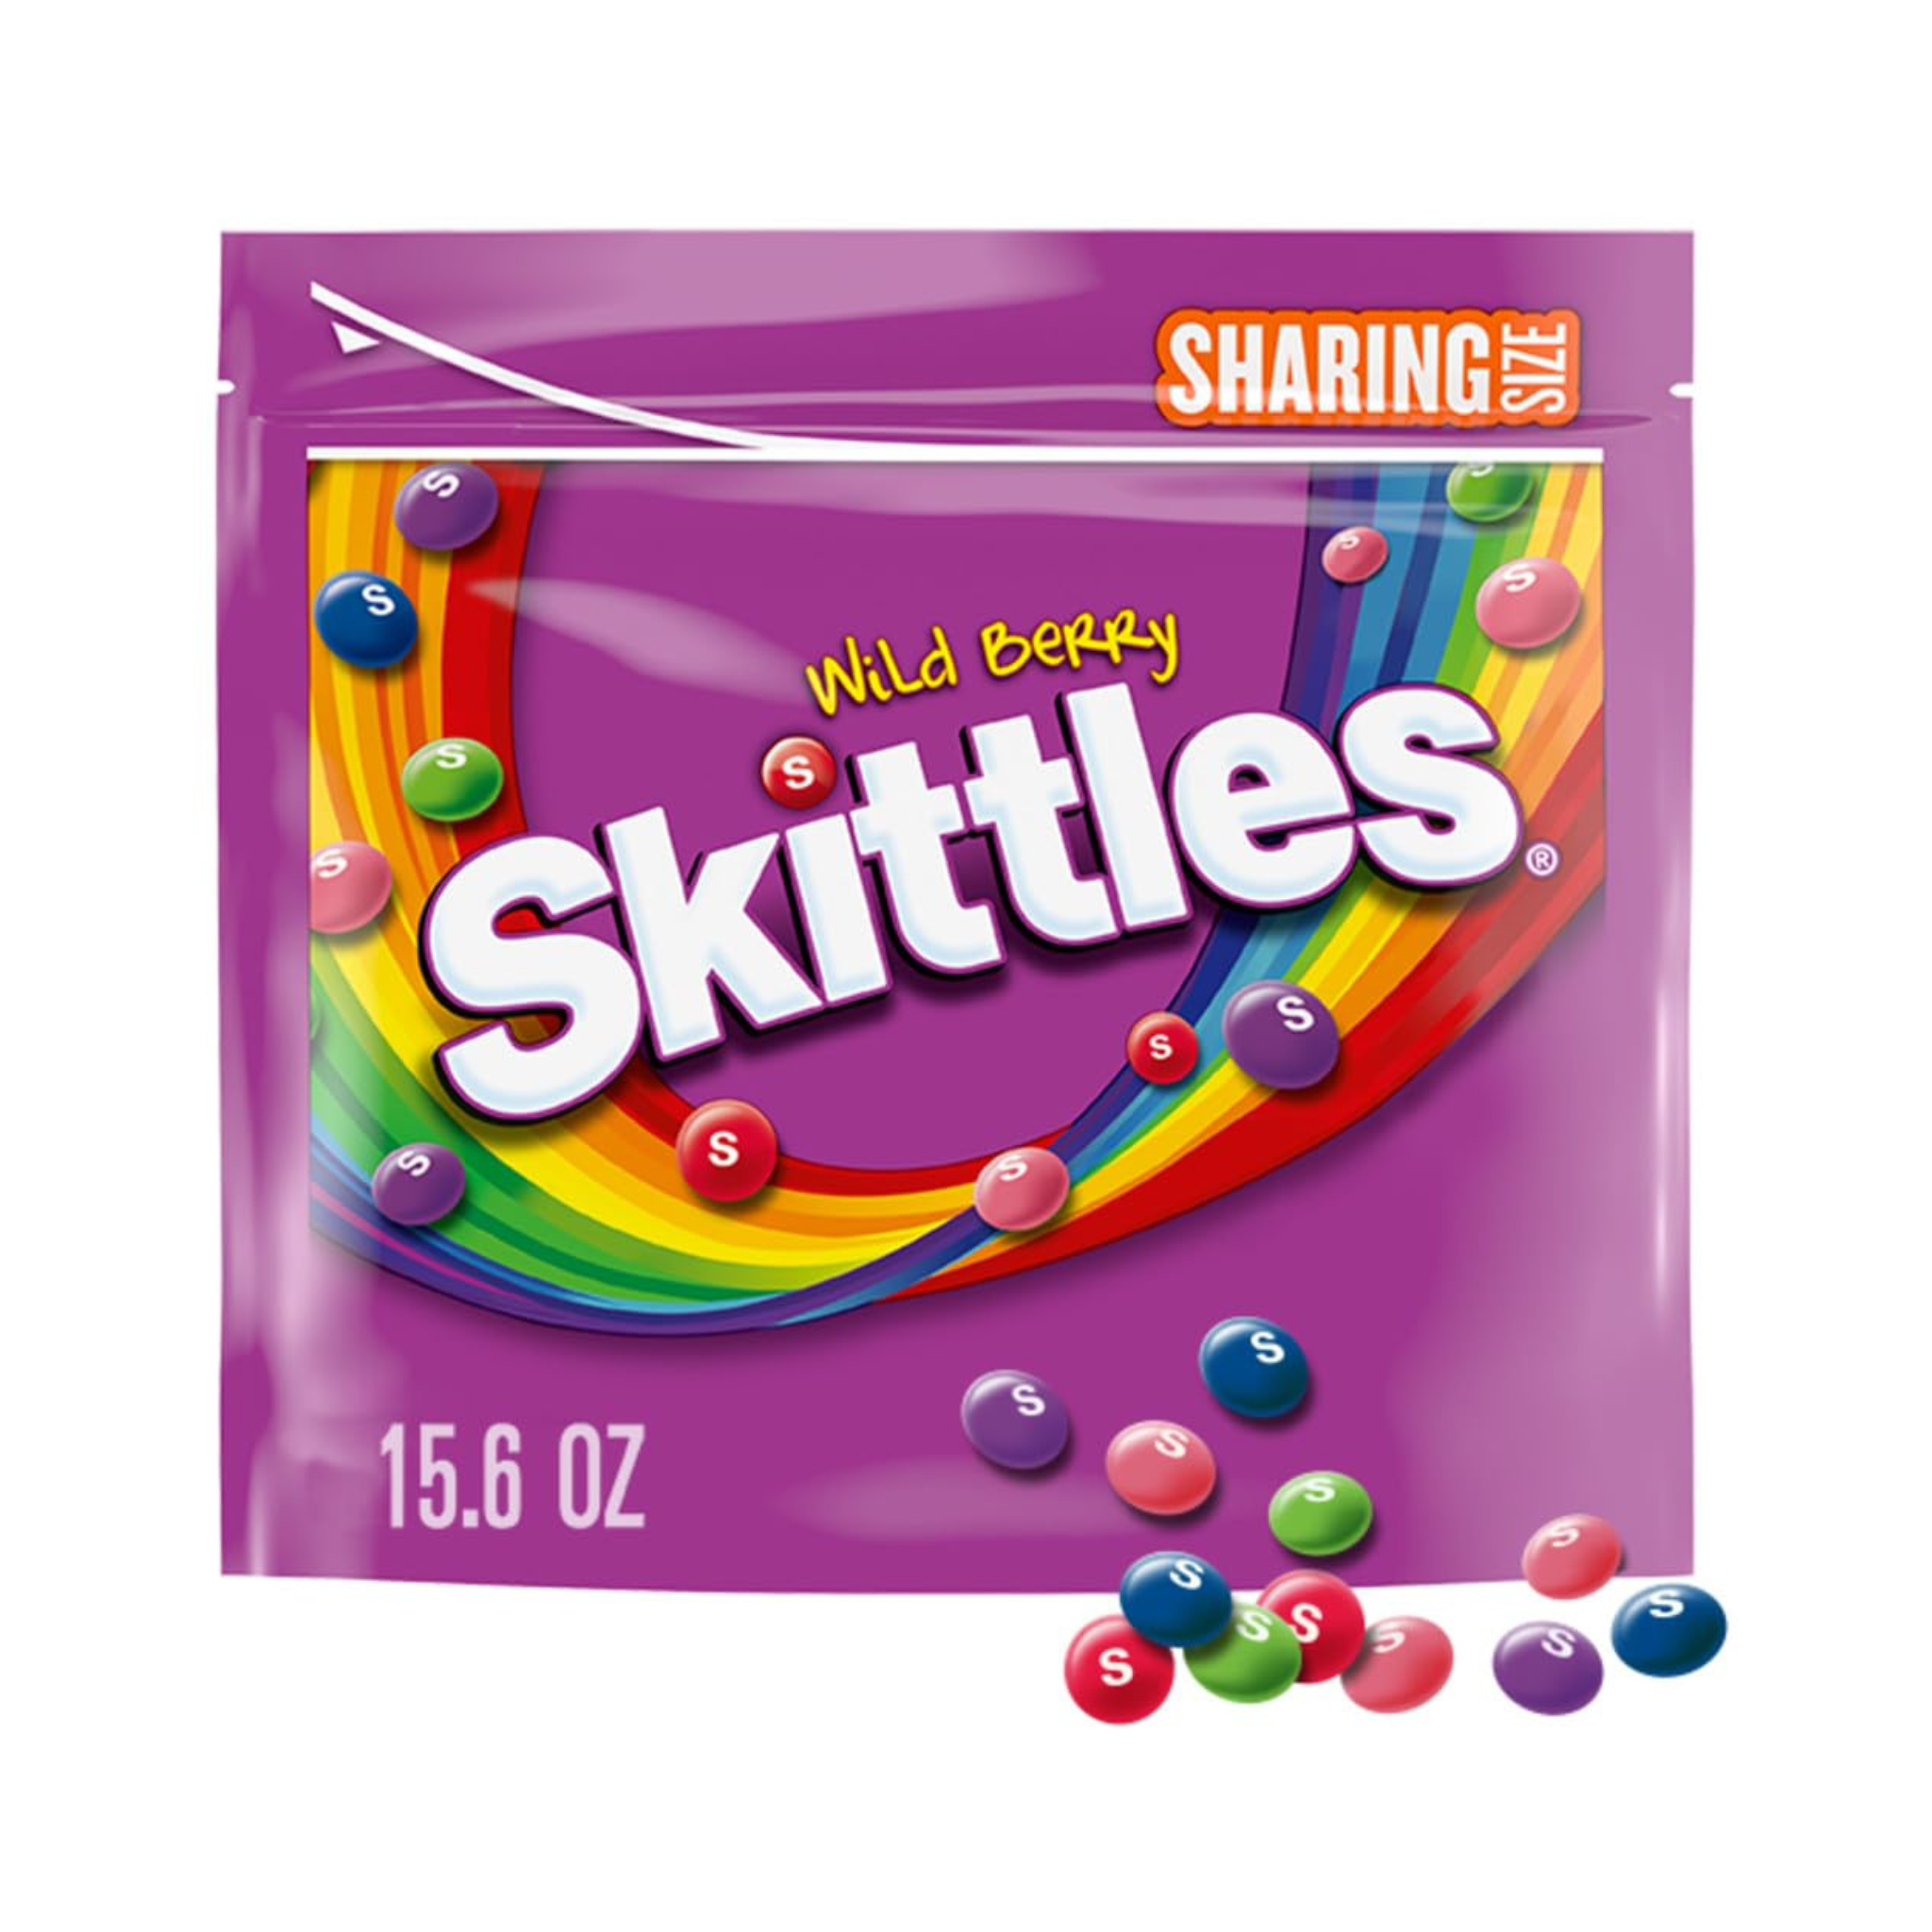 Skittles: Wild Berry Candy Sharing Size Bag (15.6 oz)